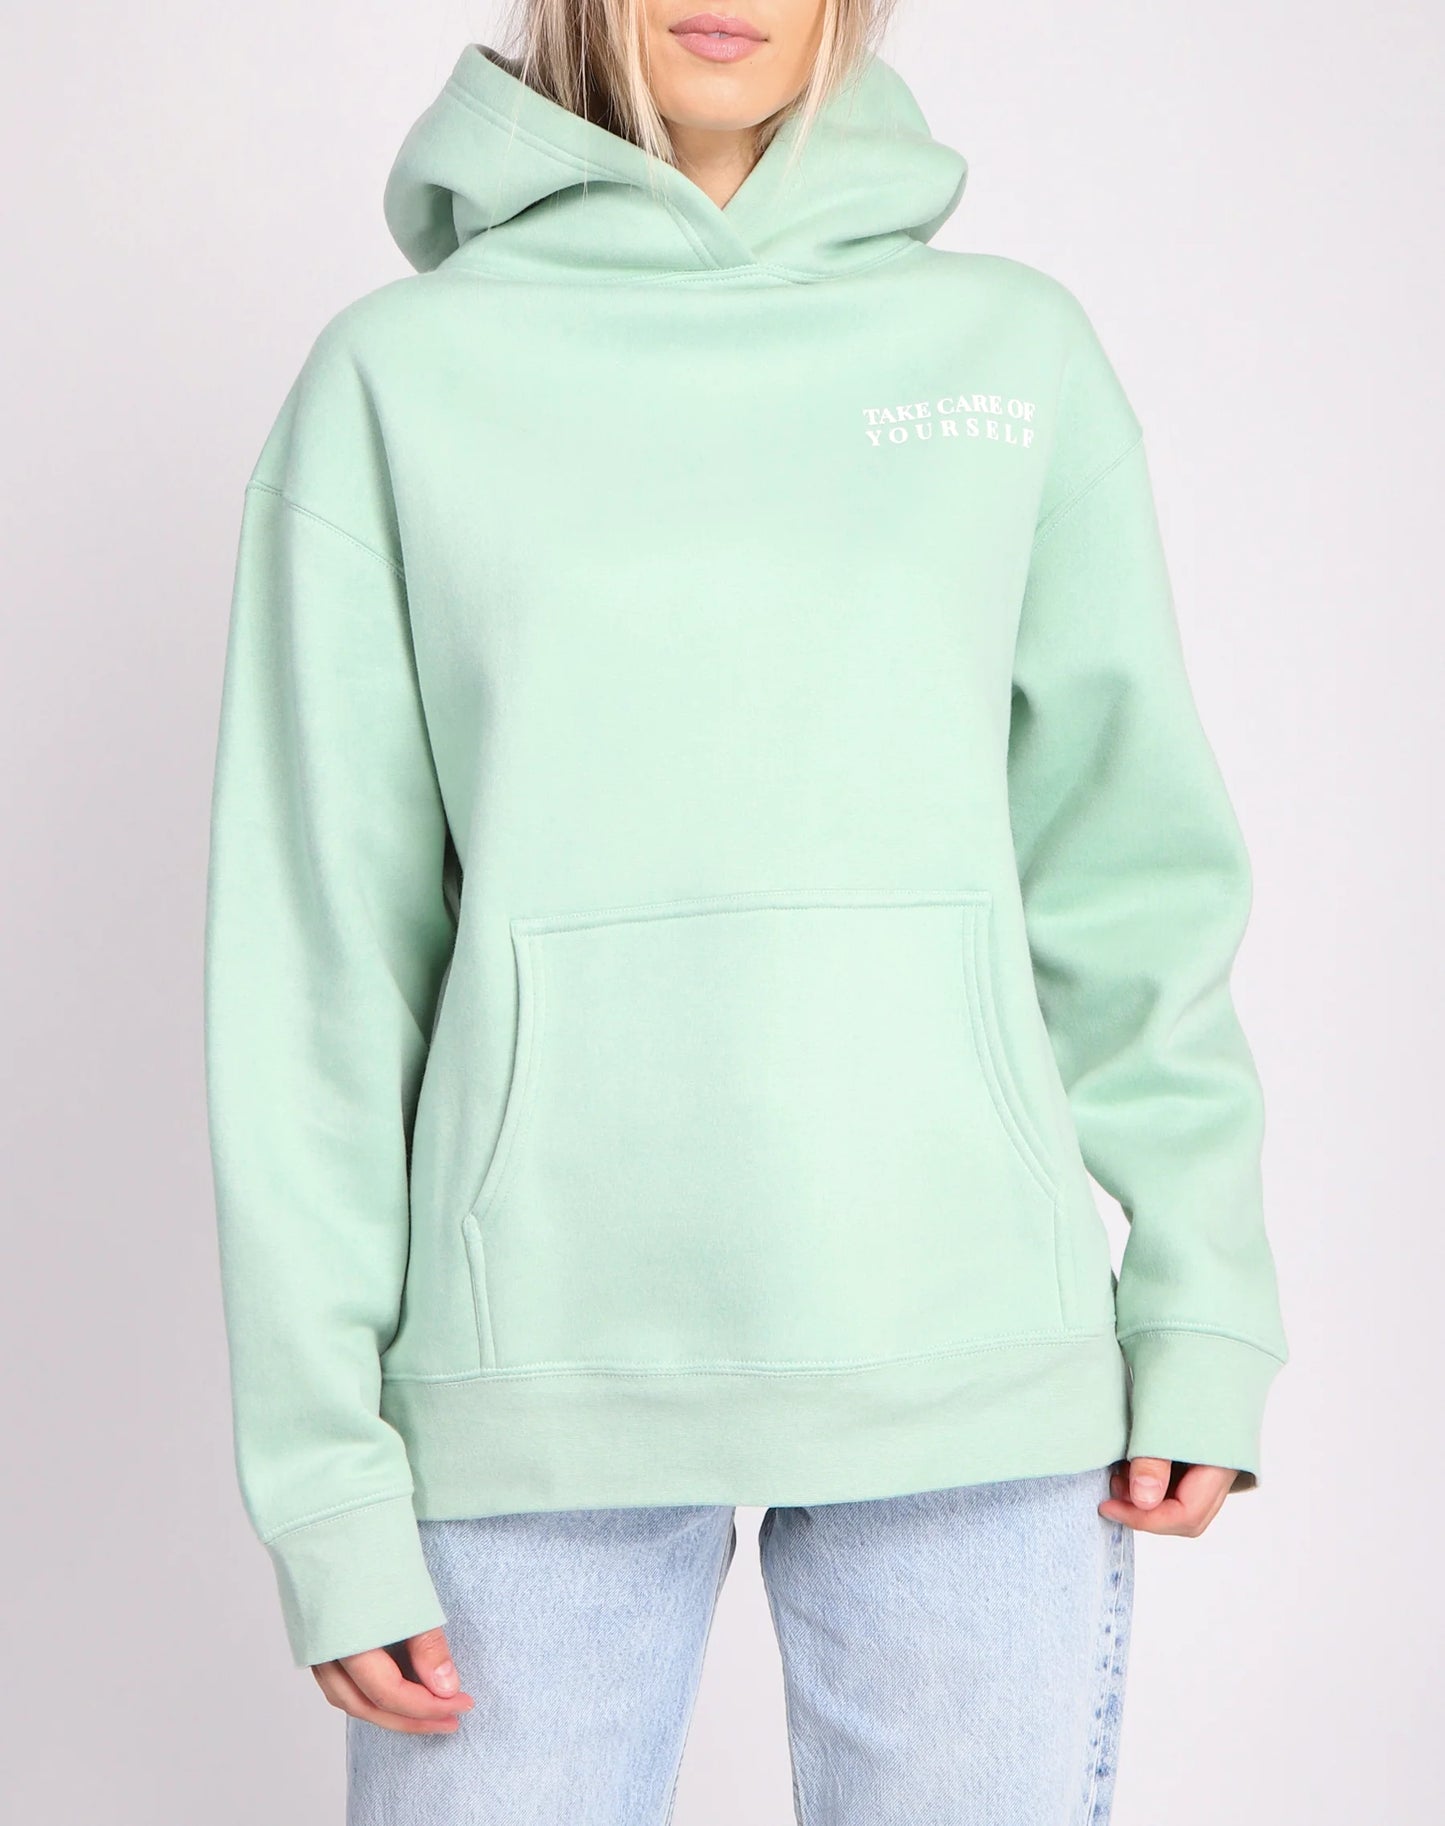 The "TAKE CARE OF EACH OTHER" Big Sister Hoodie Brunette The Label